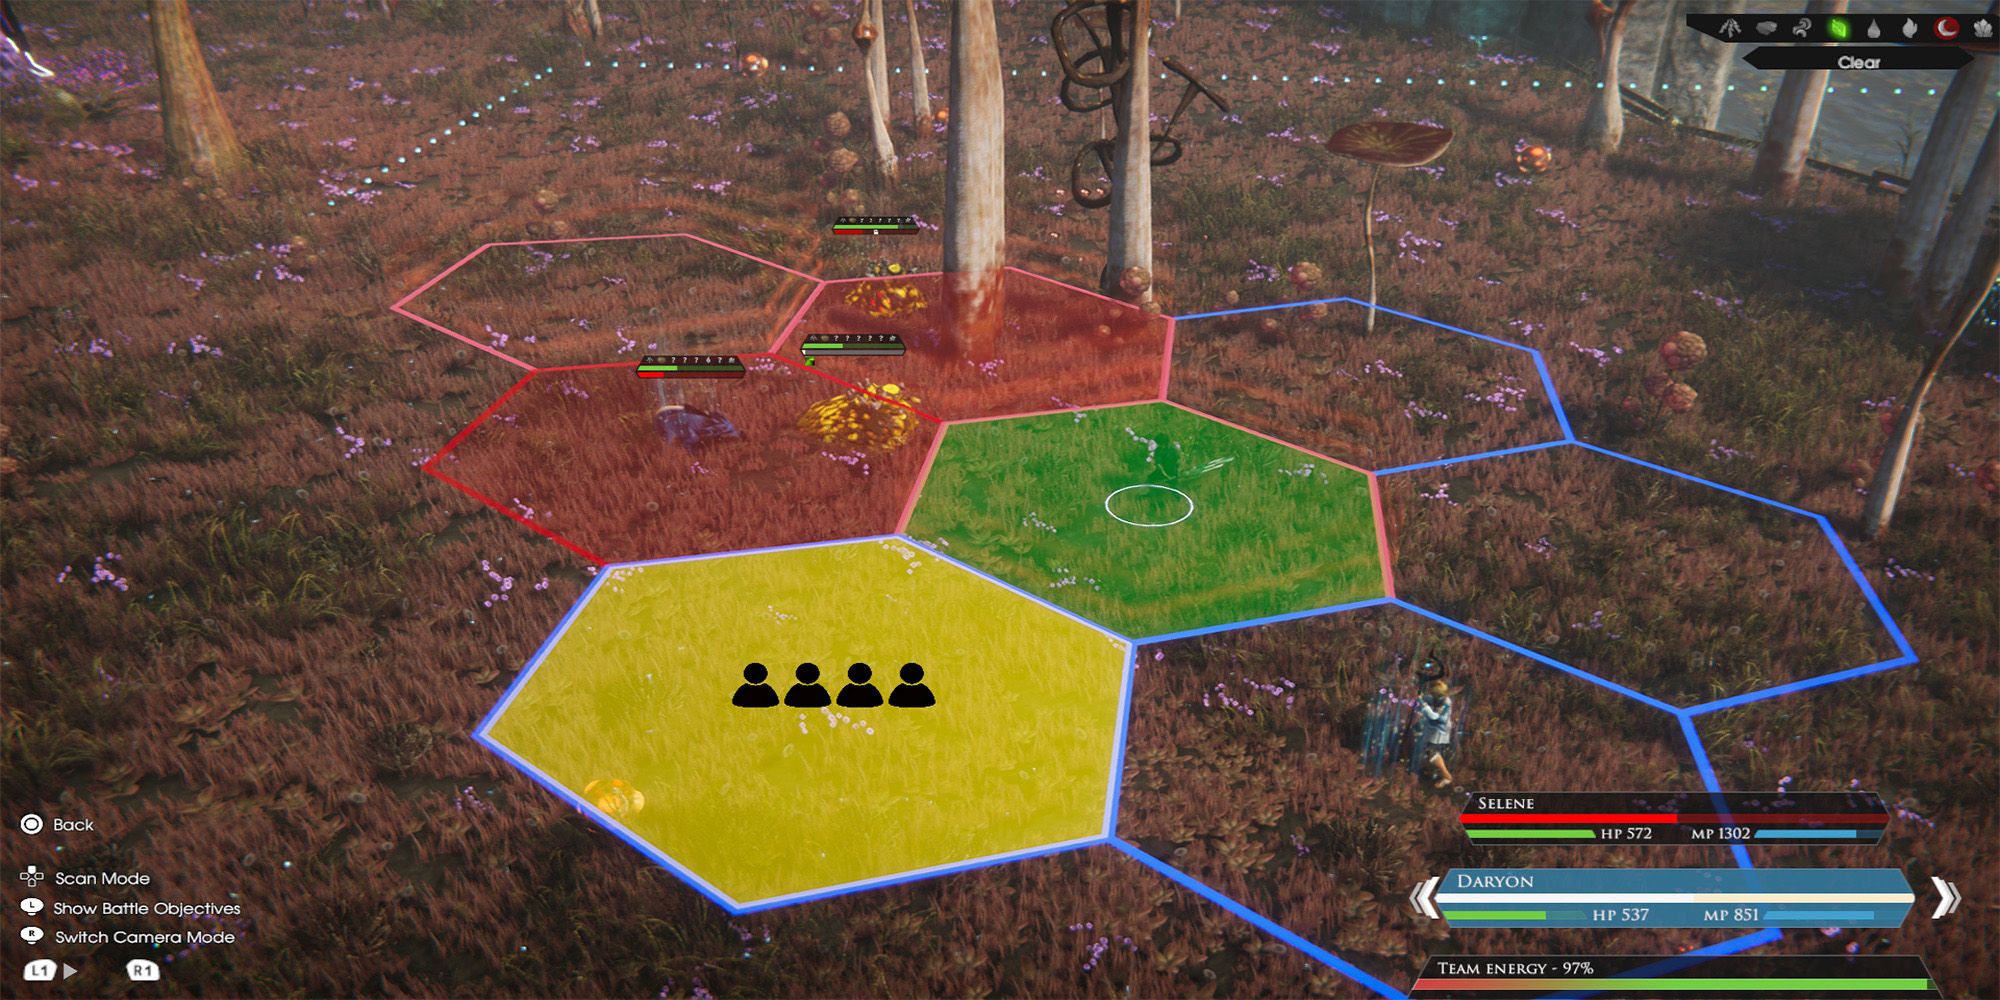 Daryon moves one nexus to the left to avoid an attack from a dodilus in the Marsh of Alasea swamp in Edge of Eternity.